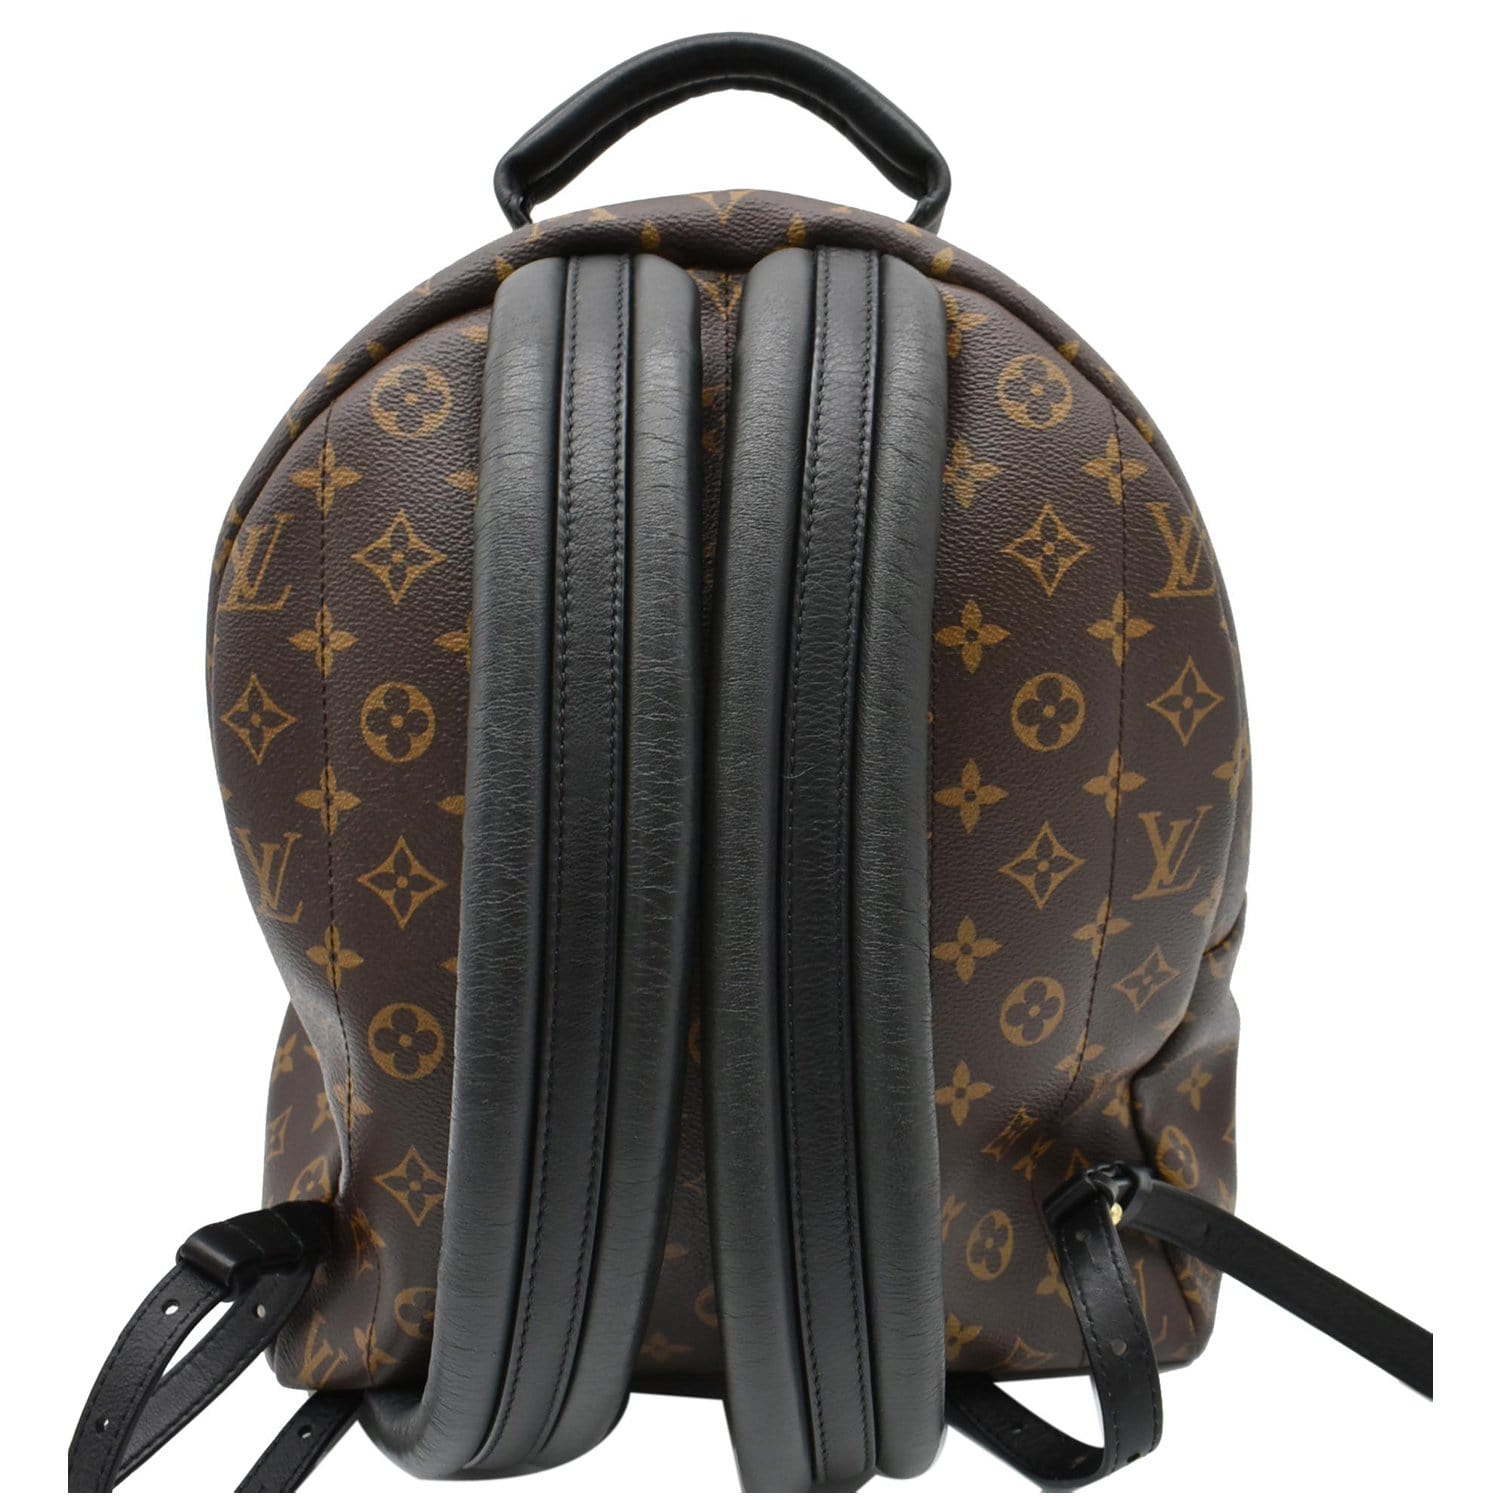 Louis Vuitton Monogram Palm Springs MM Backpack at the best price